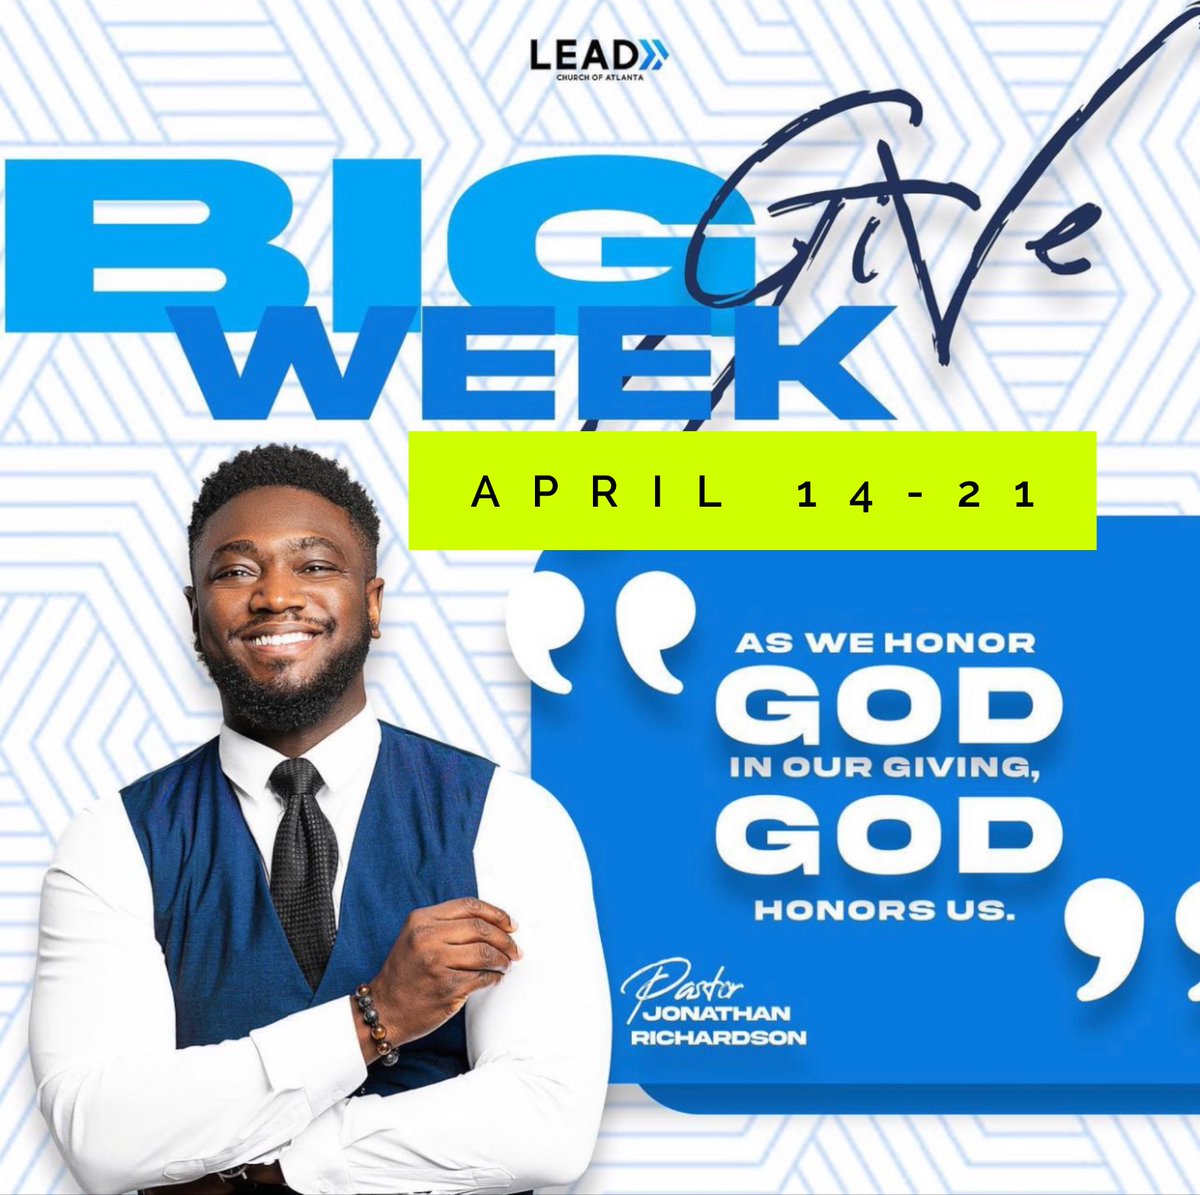 It’s APRIL BIG GIVE WEEK! Have you prayed about a seed in BIG FAITH! Let’s believe! It’s the BIG GIVE.

Ways to Give

Zelle - finance@leadchurchatlanta.org
Givelify - LEAD Church of Atlanta
Online - leadchurchatlanta.org
Venmo - @myleadnow